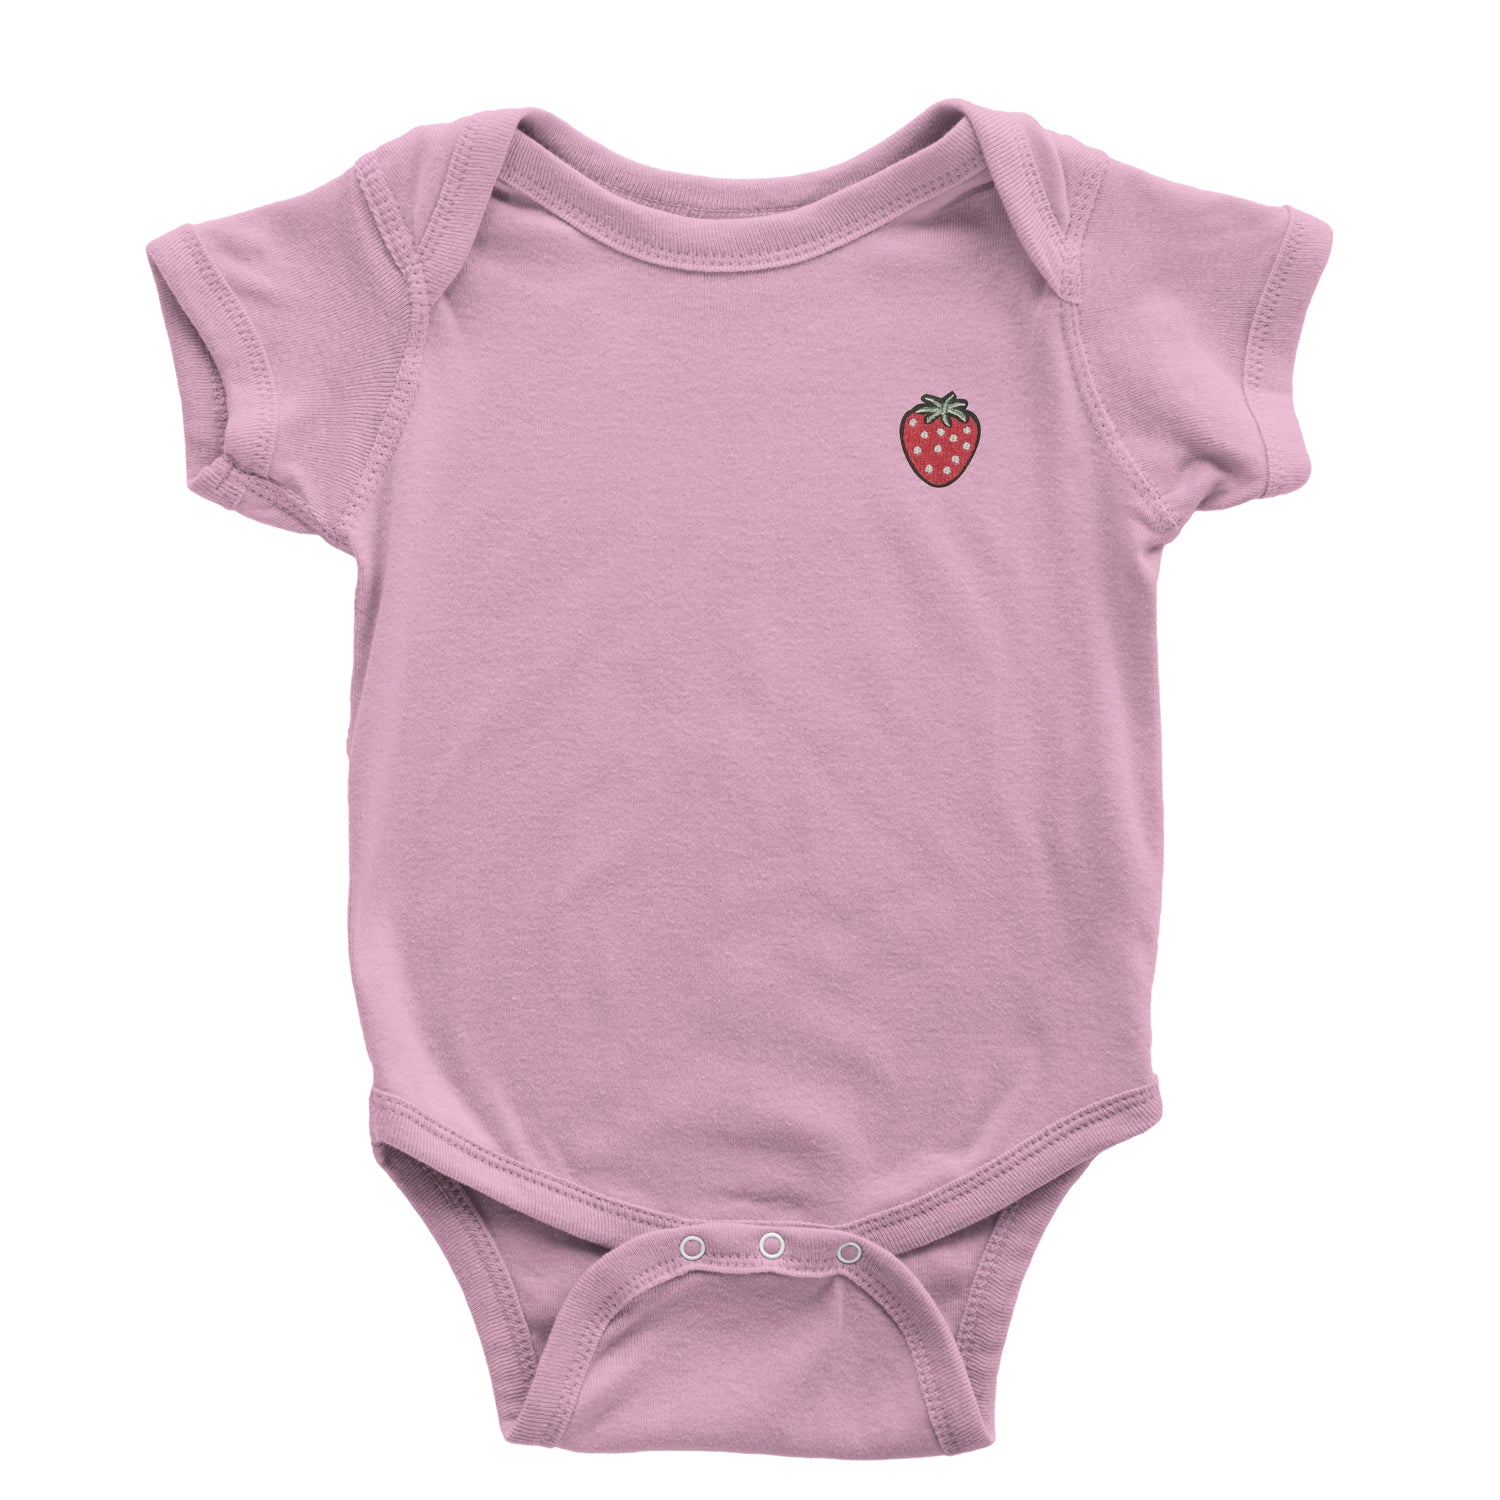 Embroidered Strawberry Patch (Pocket Print) Infant One-Piece Romper Bodysuit and Toddler T-shirt fruit, strawberries by Expression Tees